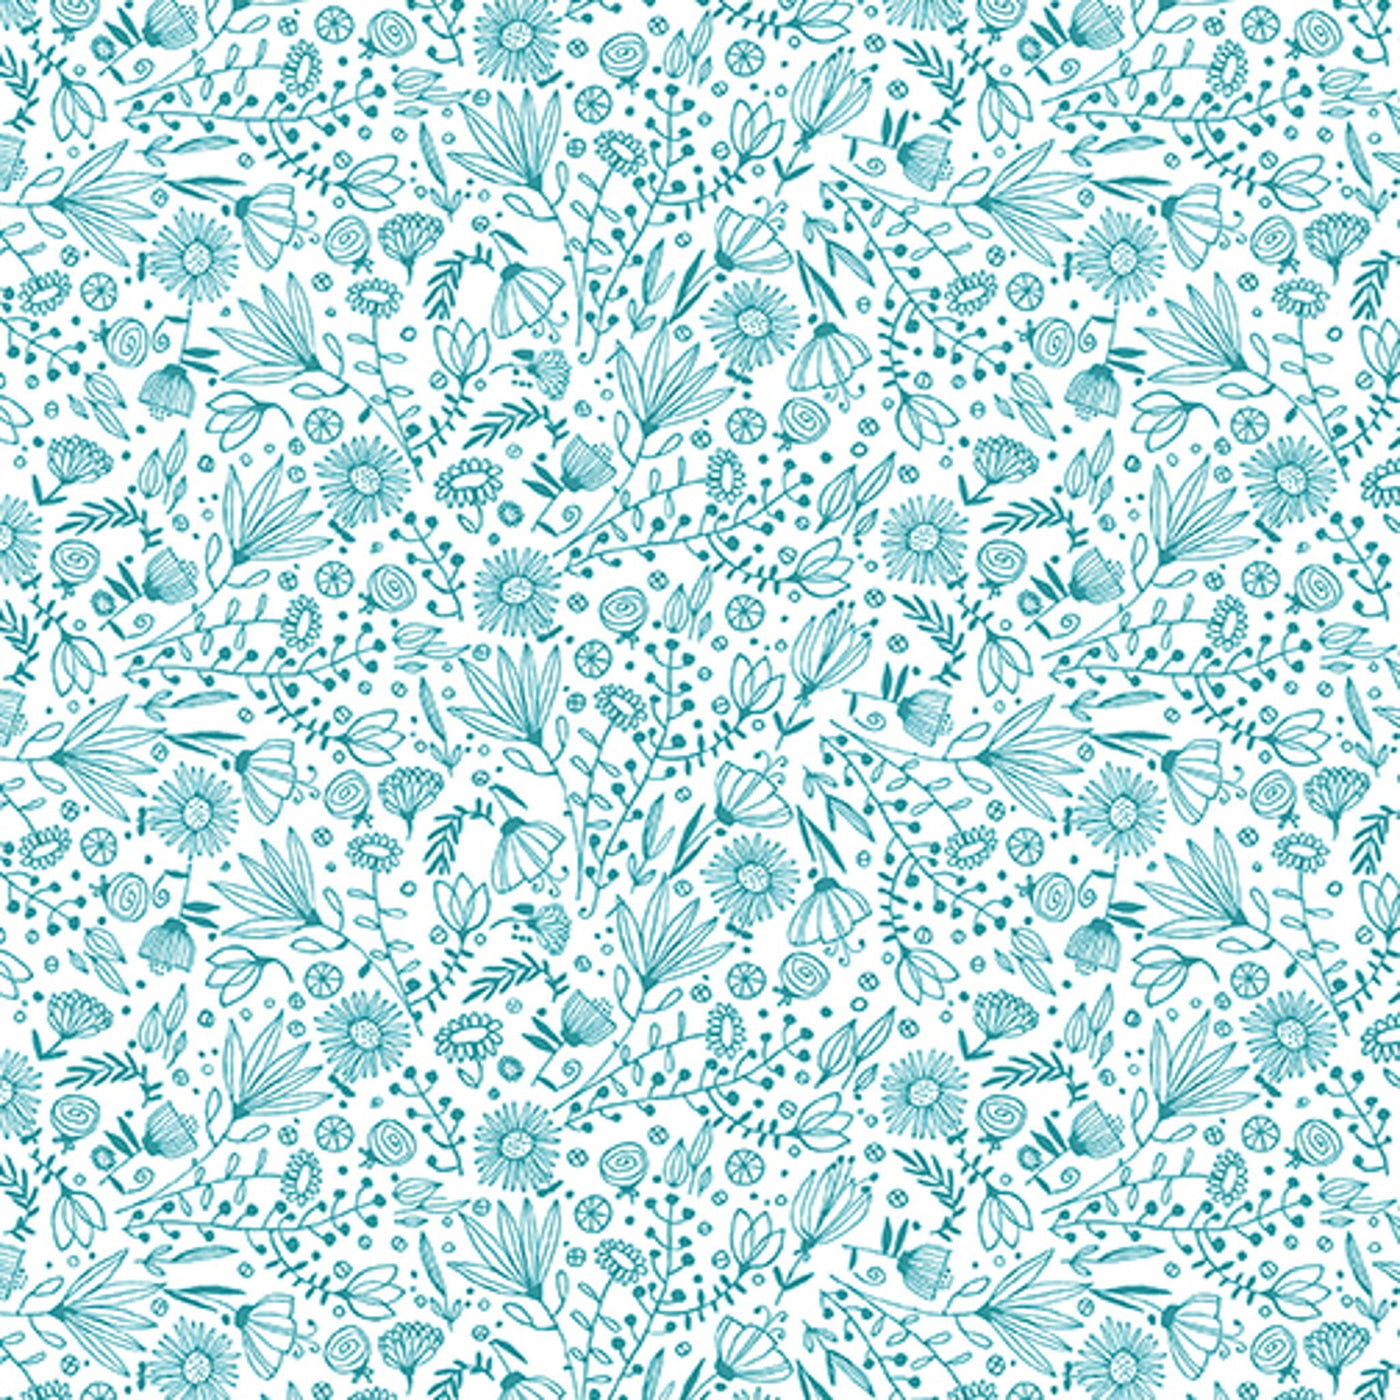 Whisp Flowers Teal 10337-80 It's raining cats and Dogs